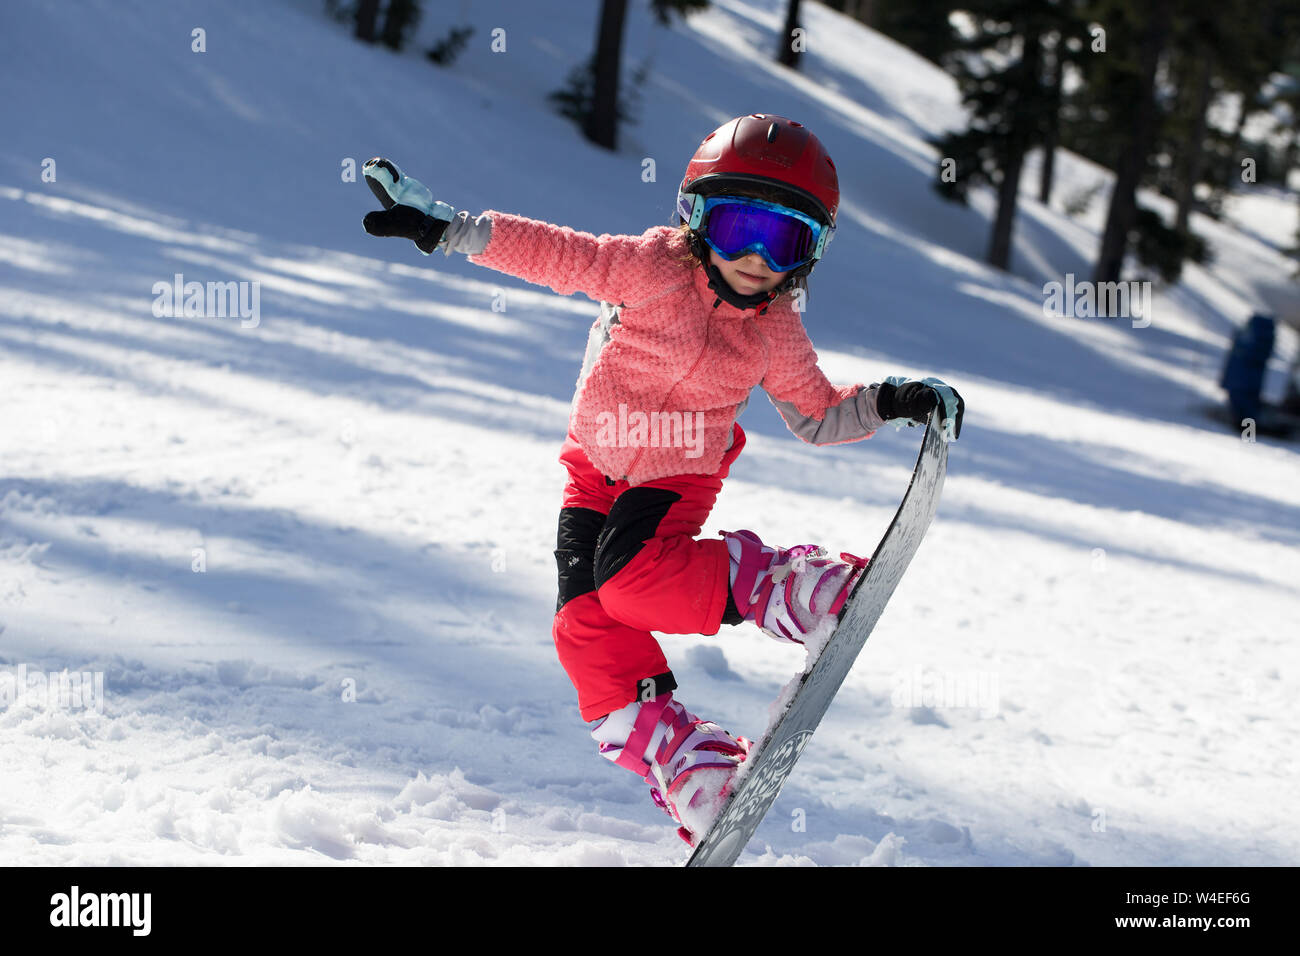 https://c8.alamy.com/comp/W4EF6G/little-cute-5-years-old-girl-snowboarding-making-a-tricks-at-ski-resort-in-sunny-winter-day-caucasus-mountains-mount-hood-meadows-oregon-W4EF6G.jpg